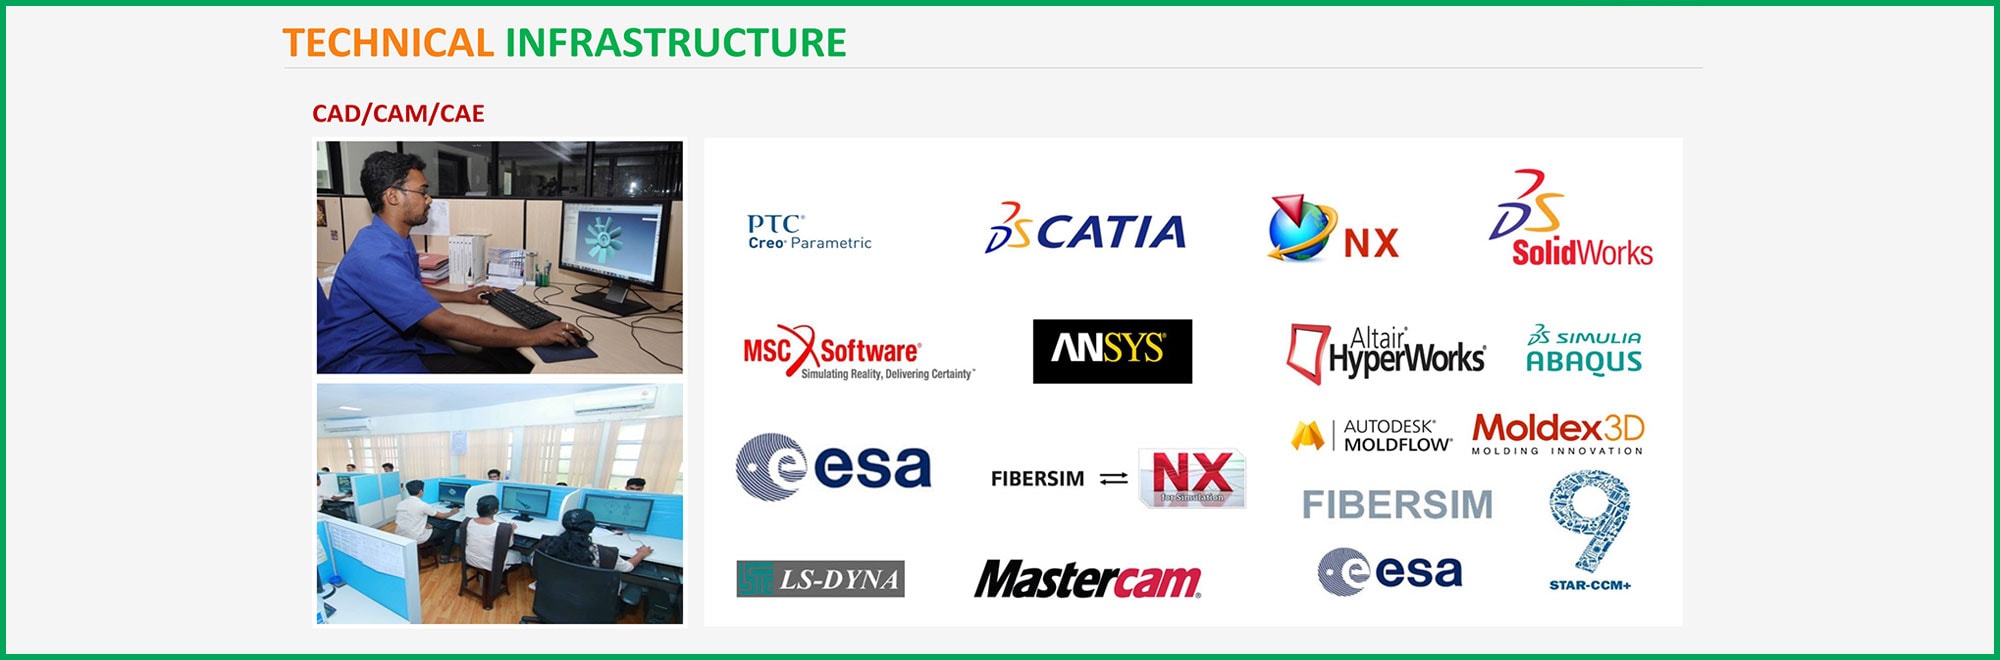 TECHNICAL INFRASTRUCTURE - CAD/CAM/CAE